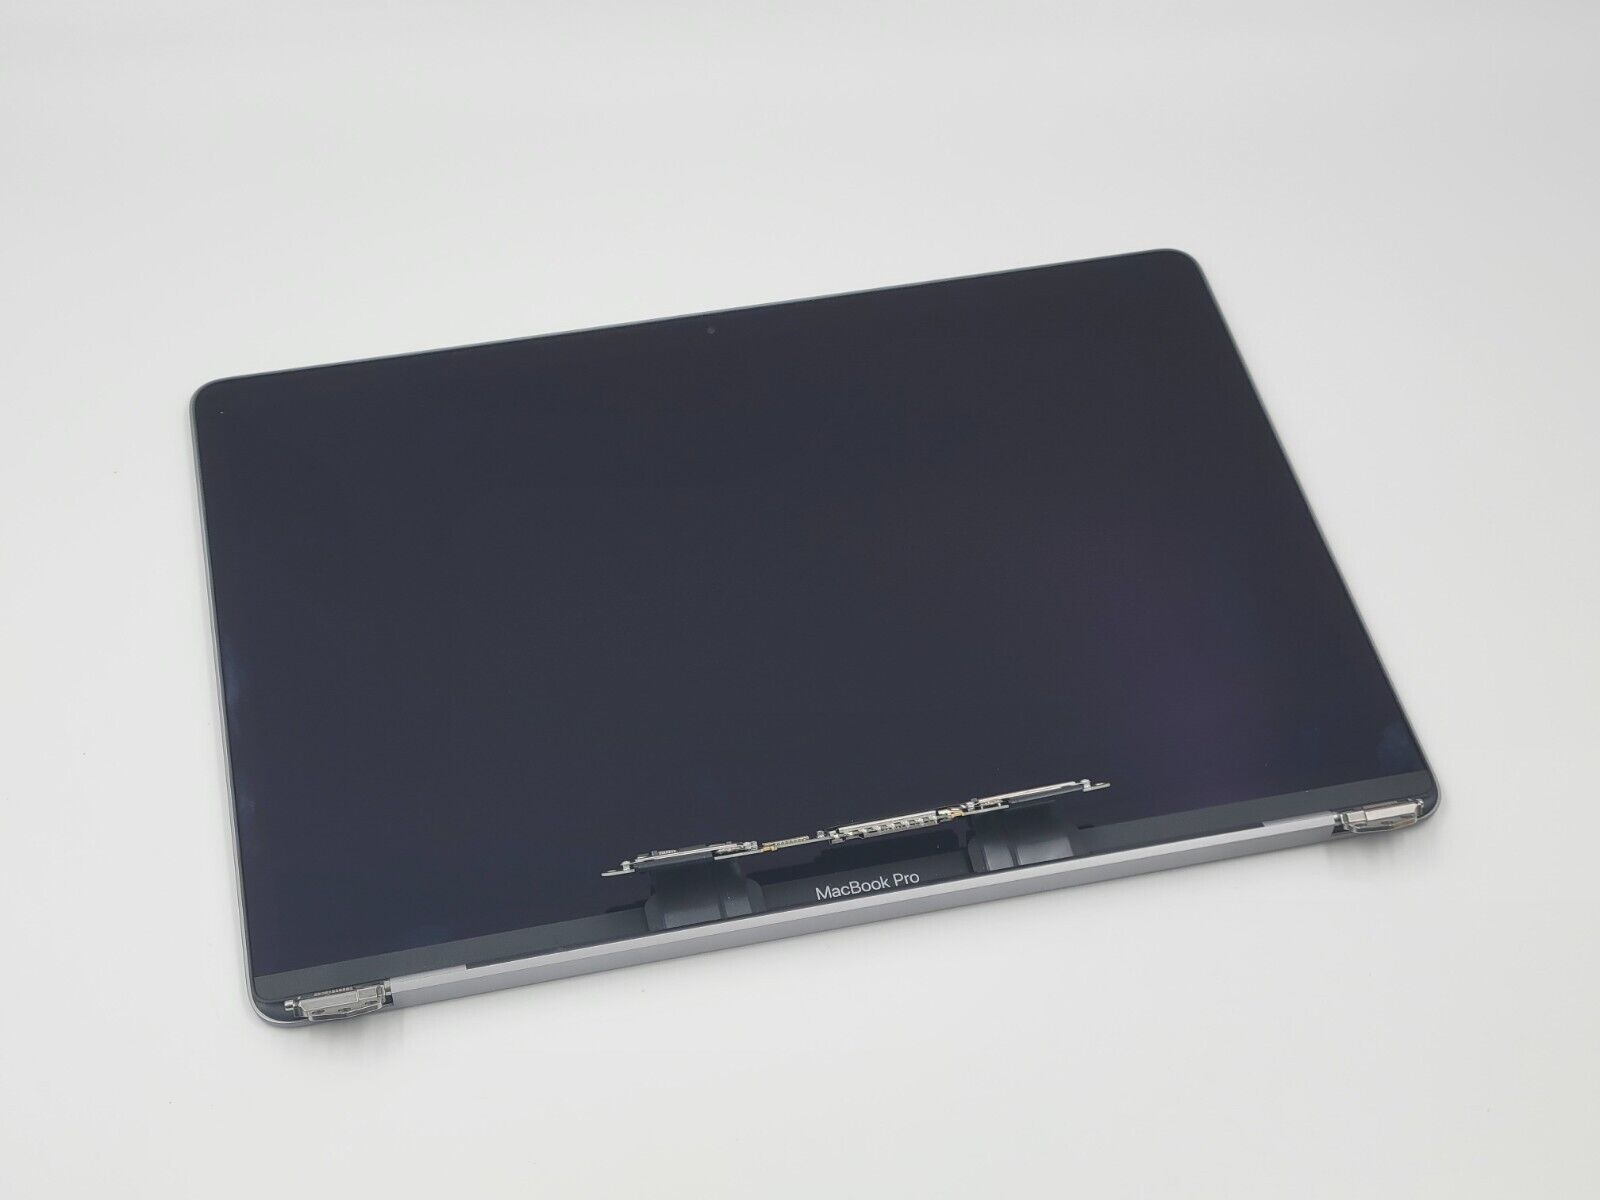 OEM A1989 A2159 A2289 A2251 LCD Display Macbook Pro 13 2018 2019 2020 Space Gray